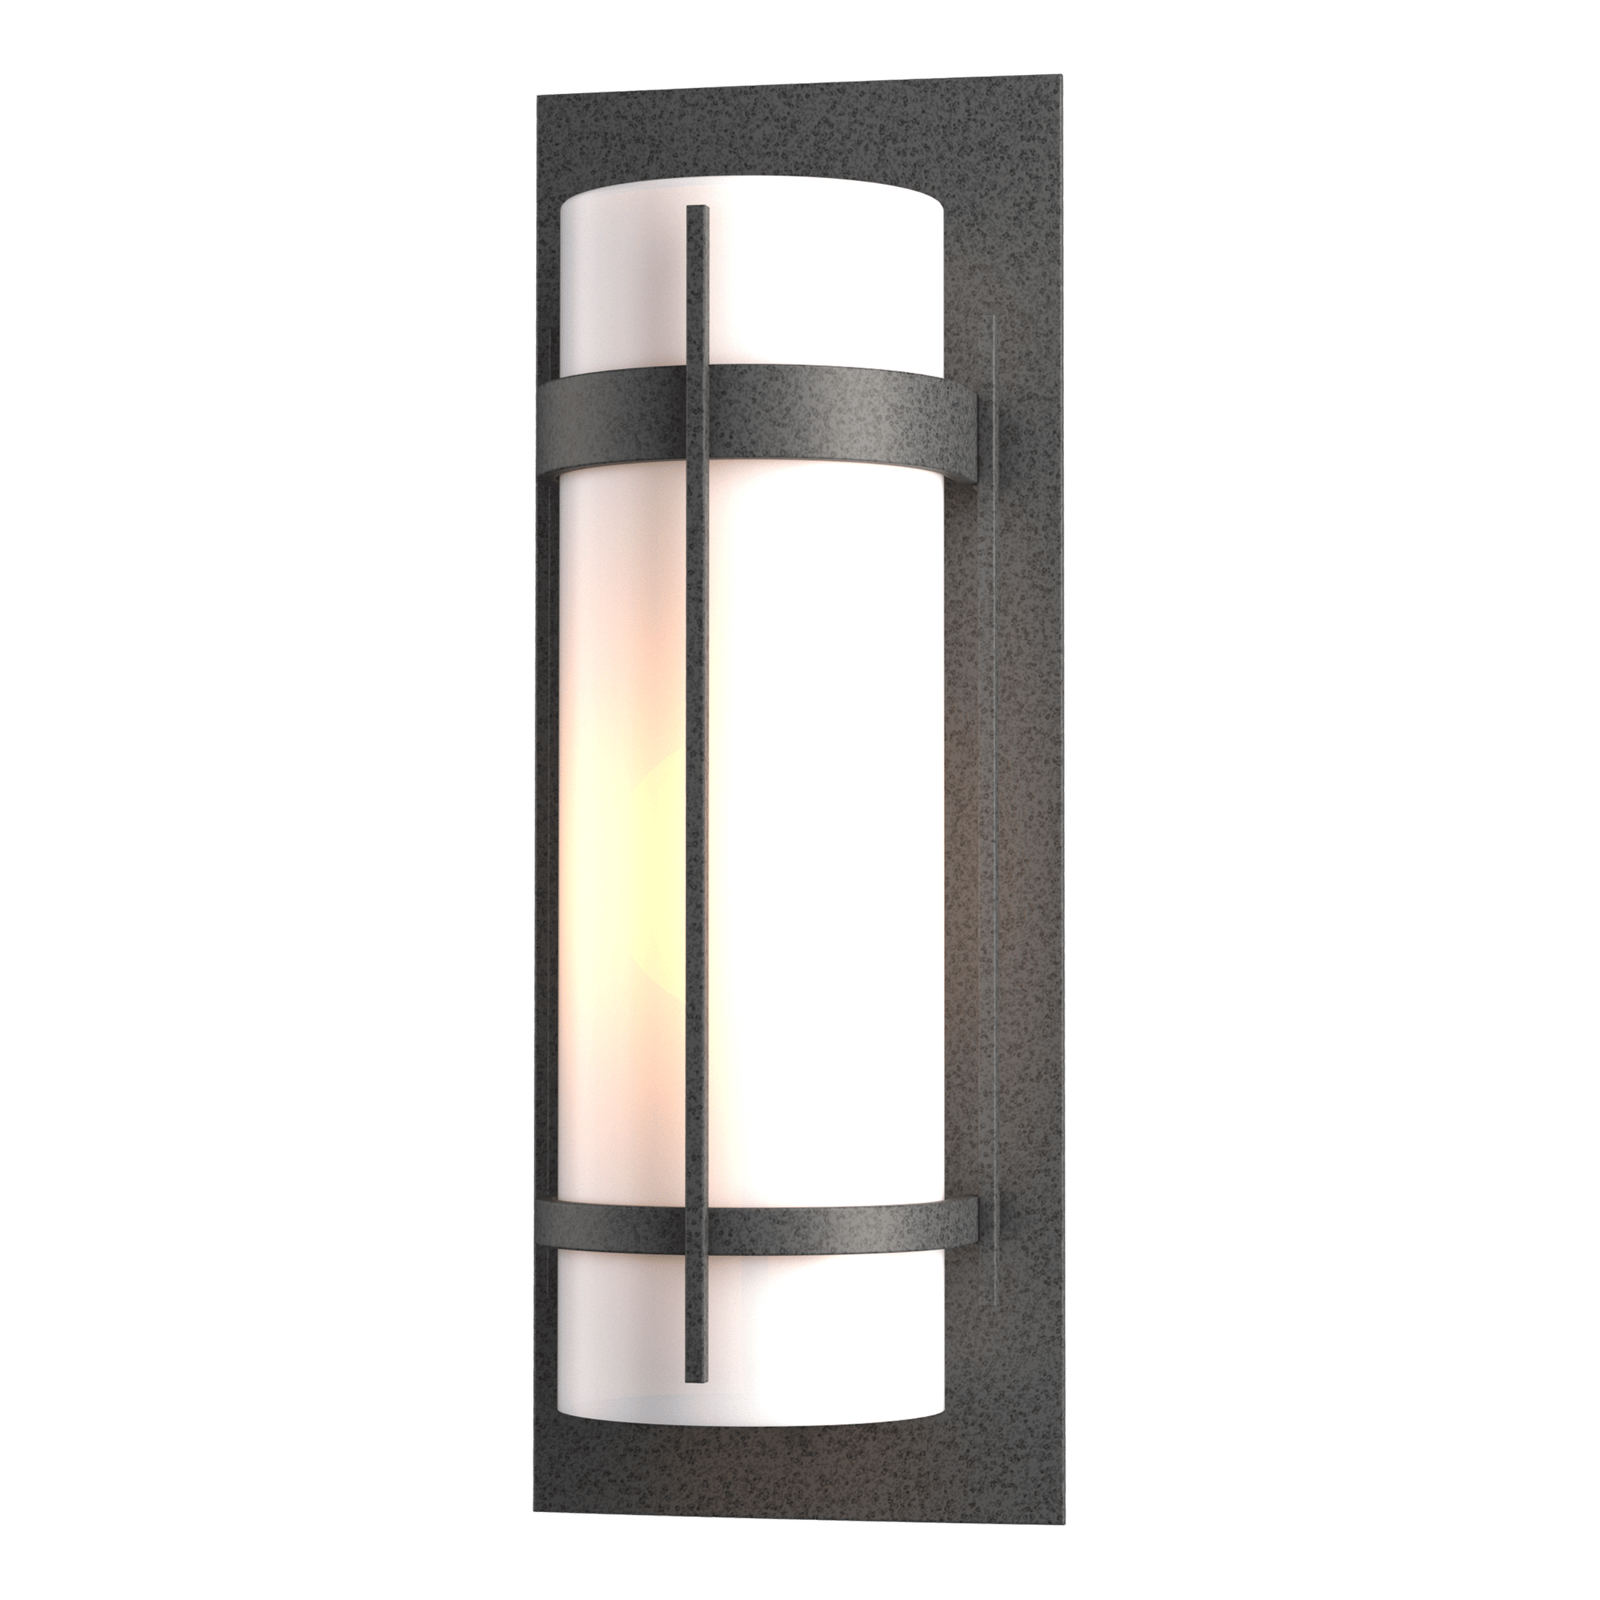 Hubbardton Forge Banded Large Outdoor Sconce Outdoor l Wall Hubbardton Forge Coastal Natural Iron  